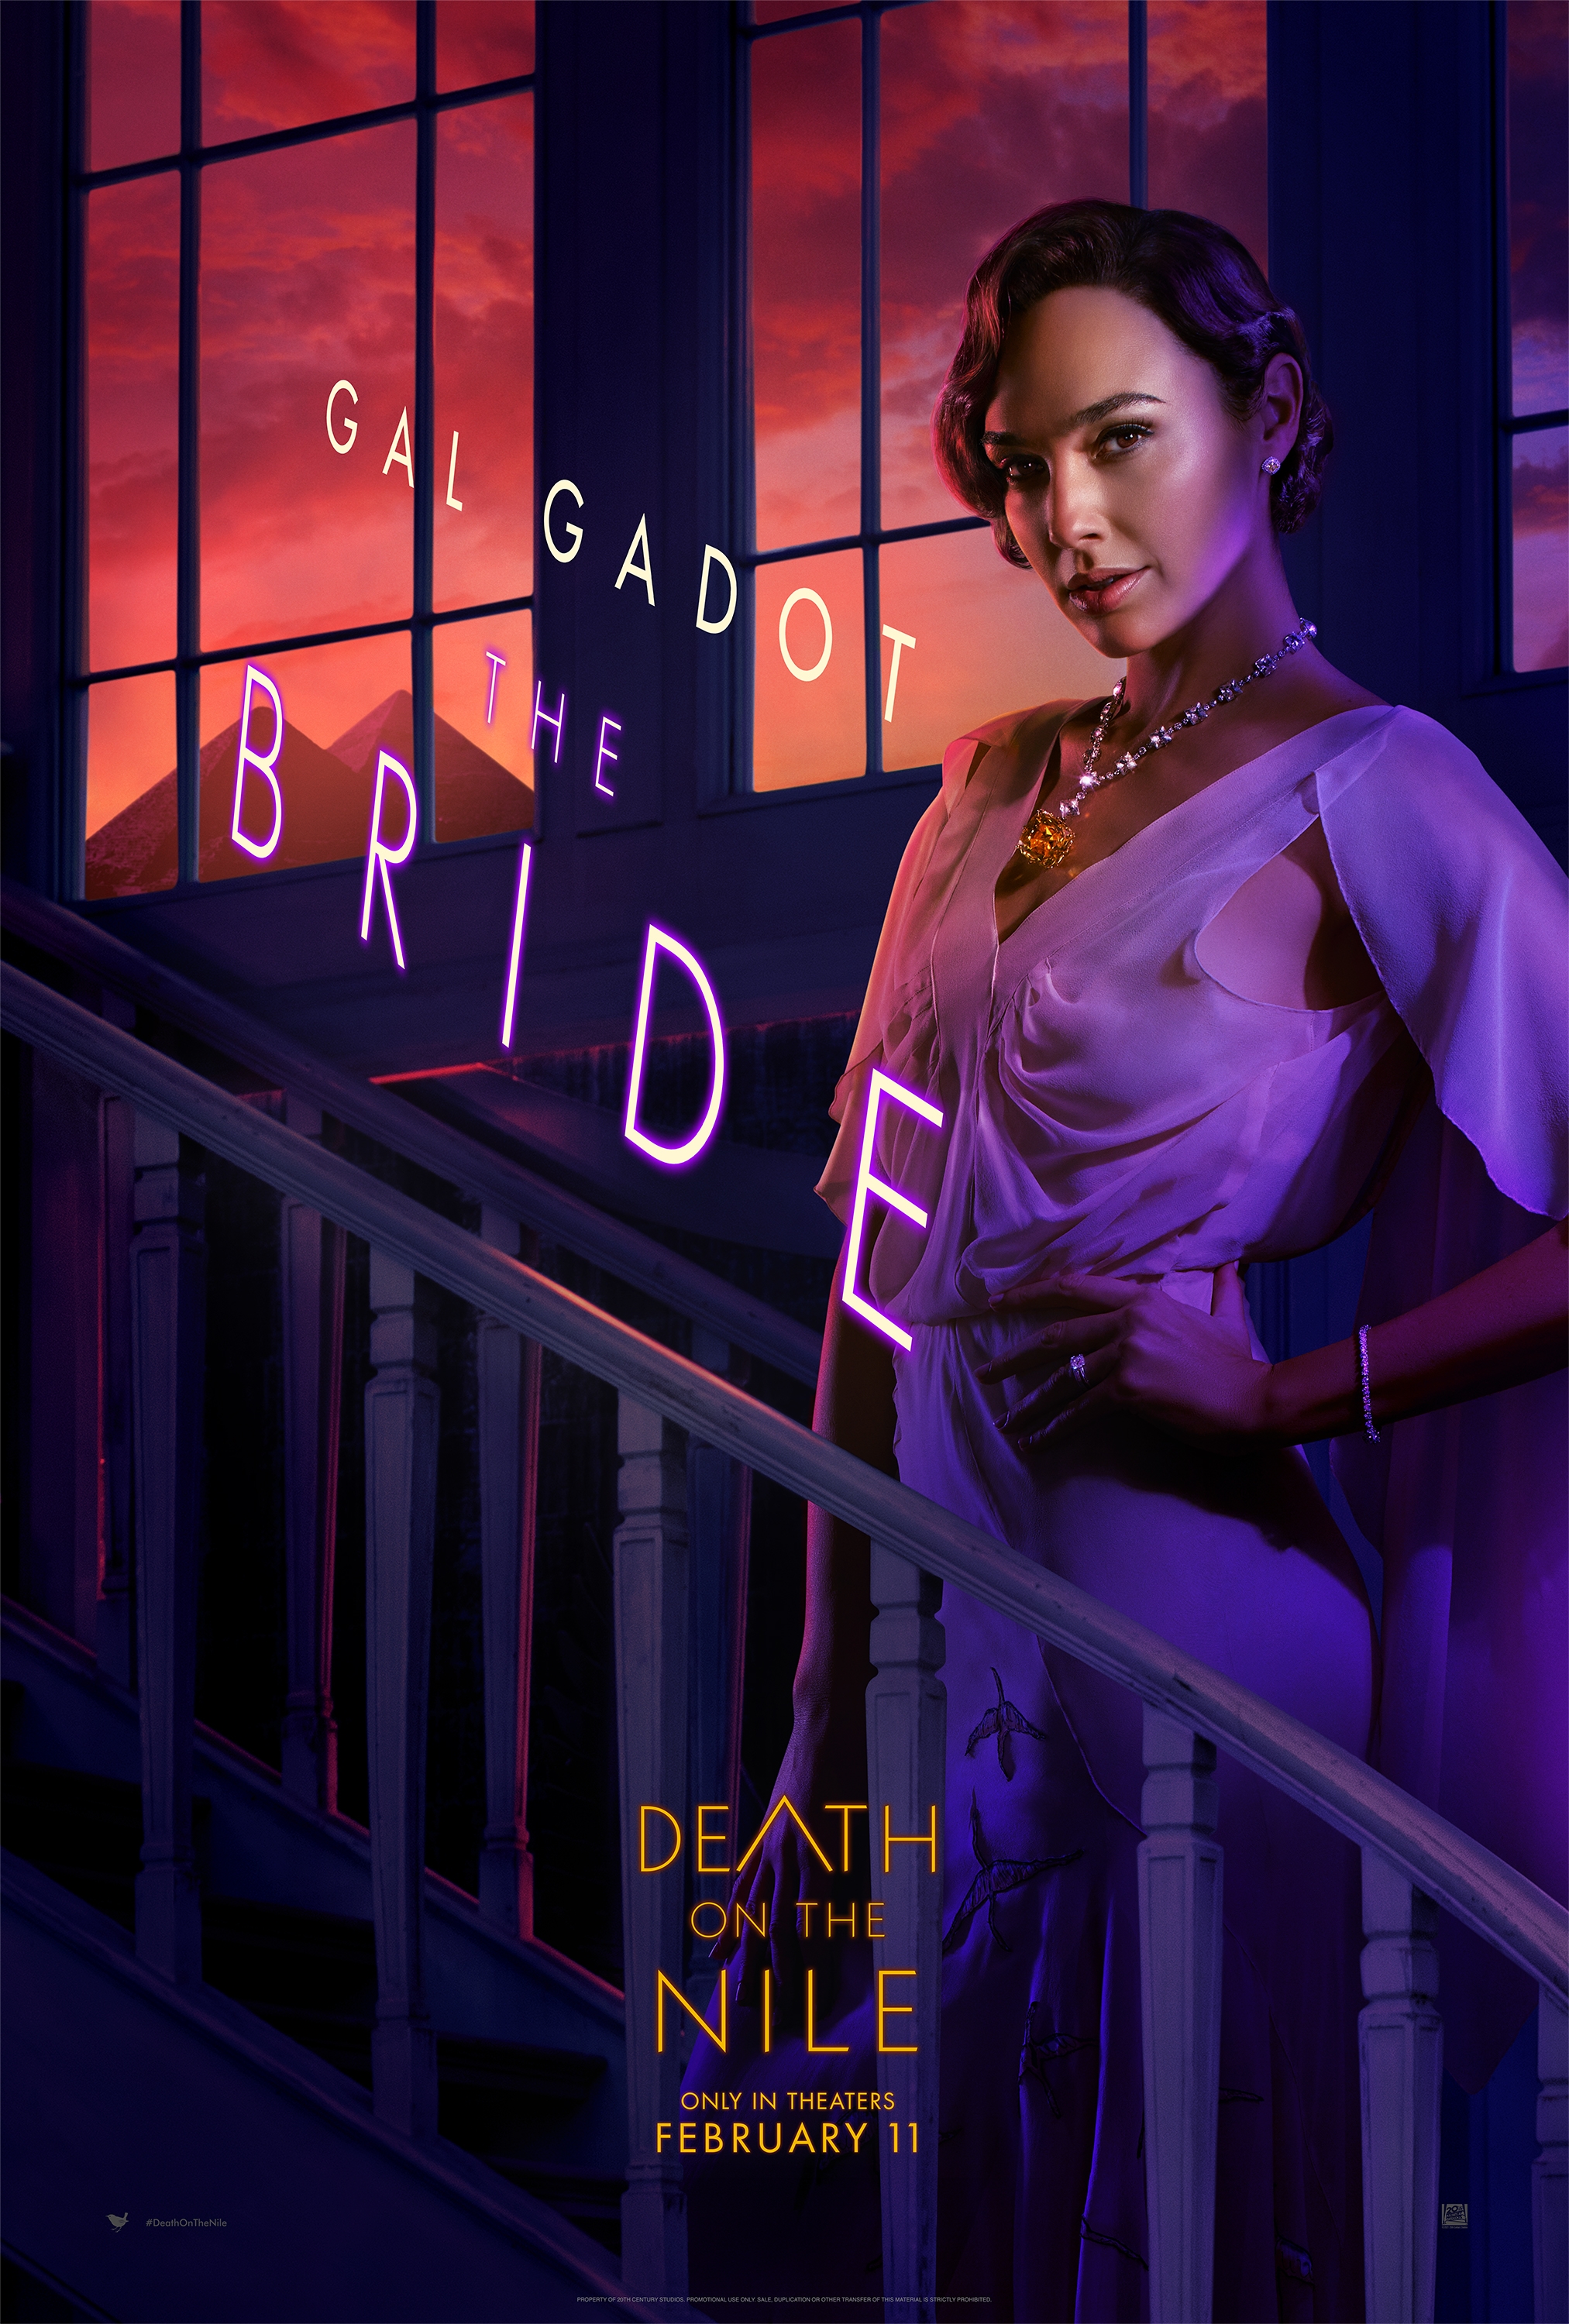  Death on the Nile | Gal Gadot (Character Poster)